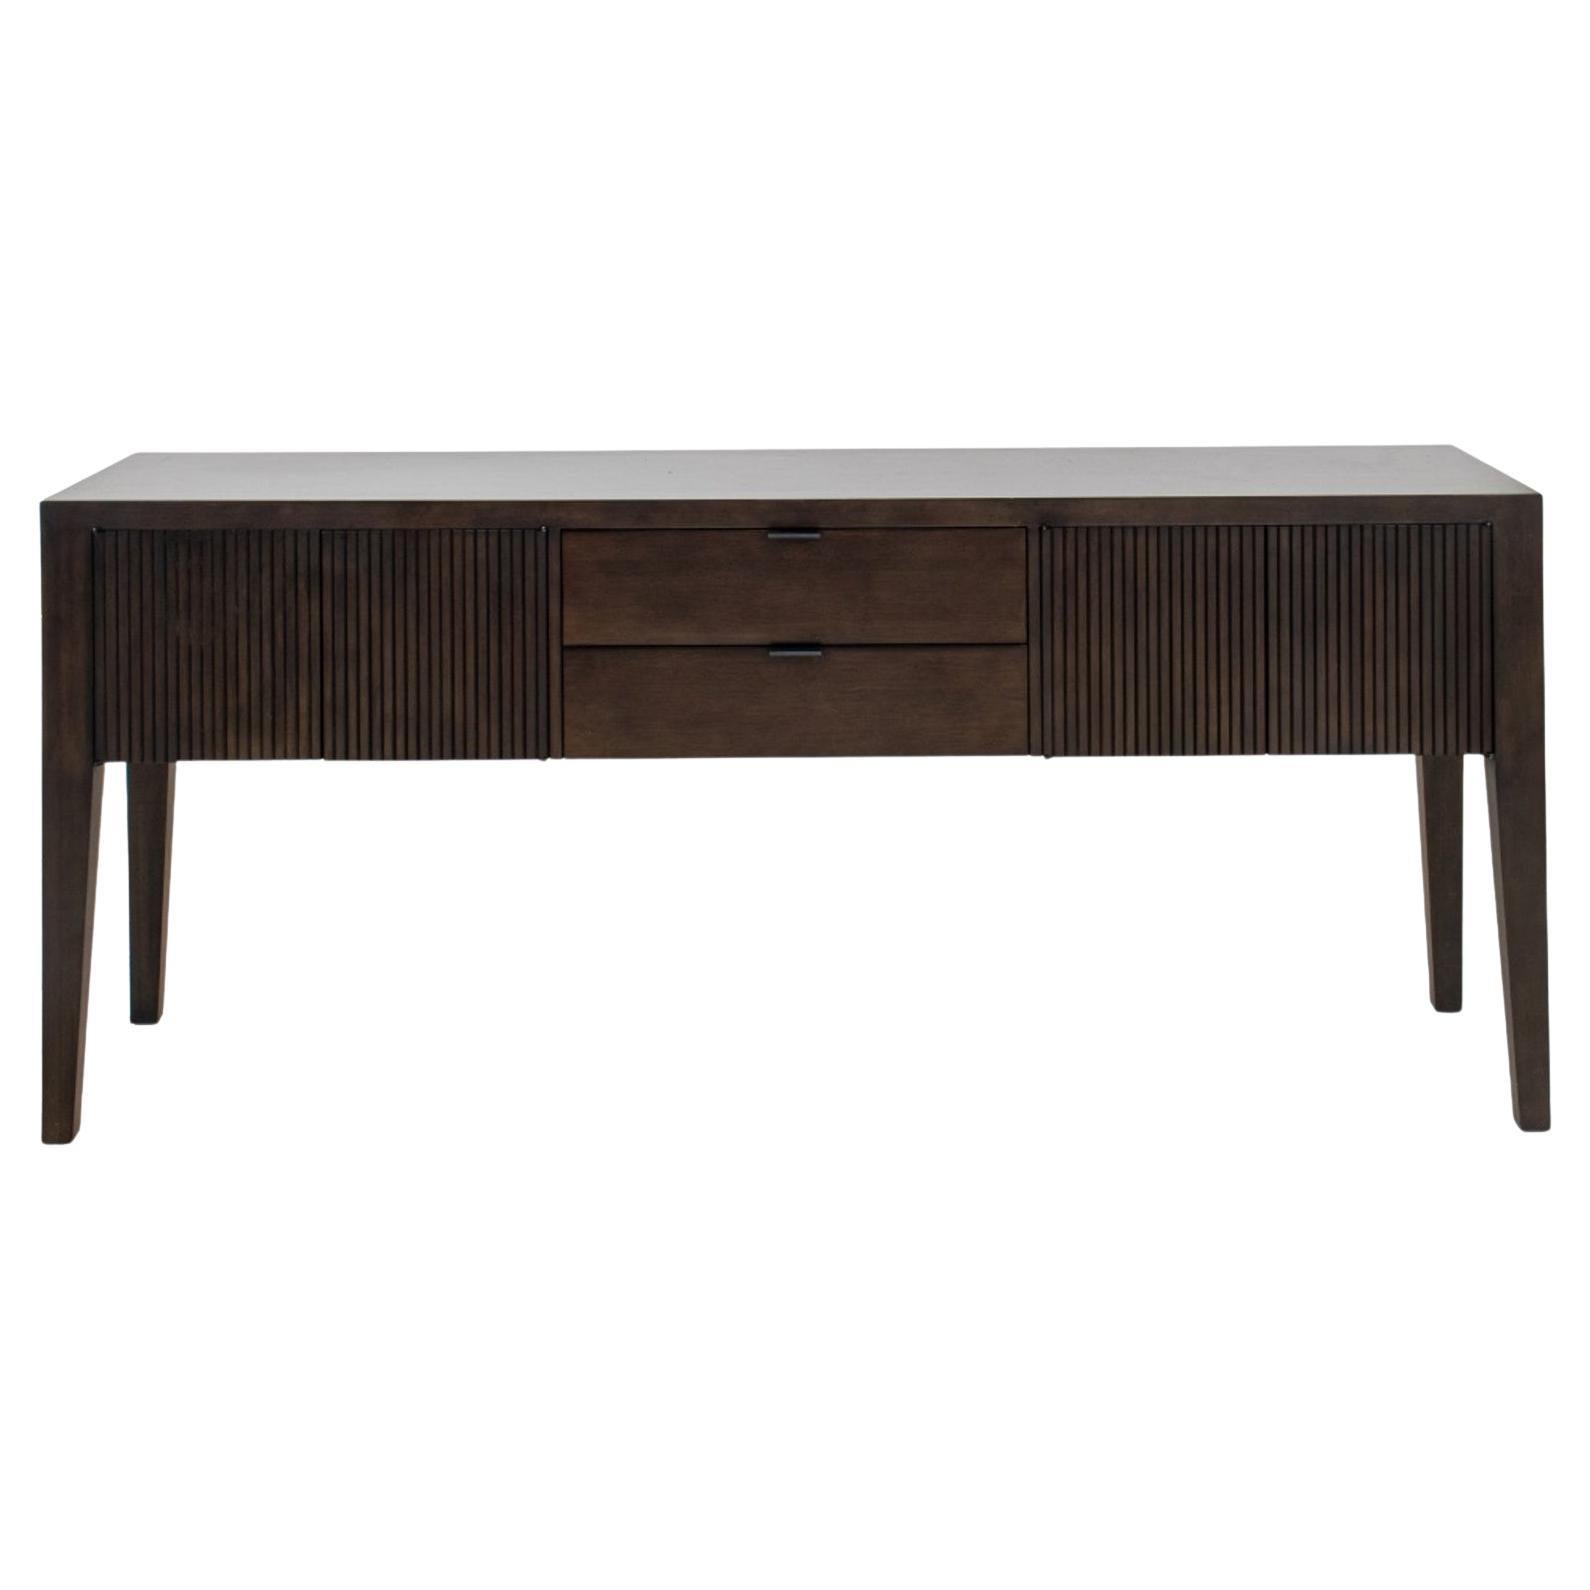 Maria Yee for Room & Board Bamboo Timbre Credenza